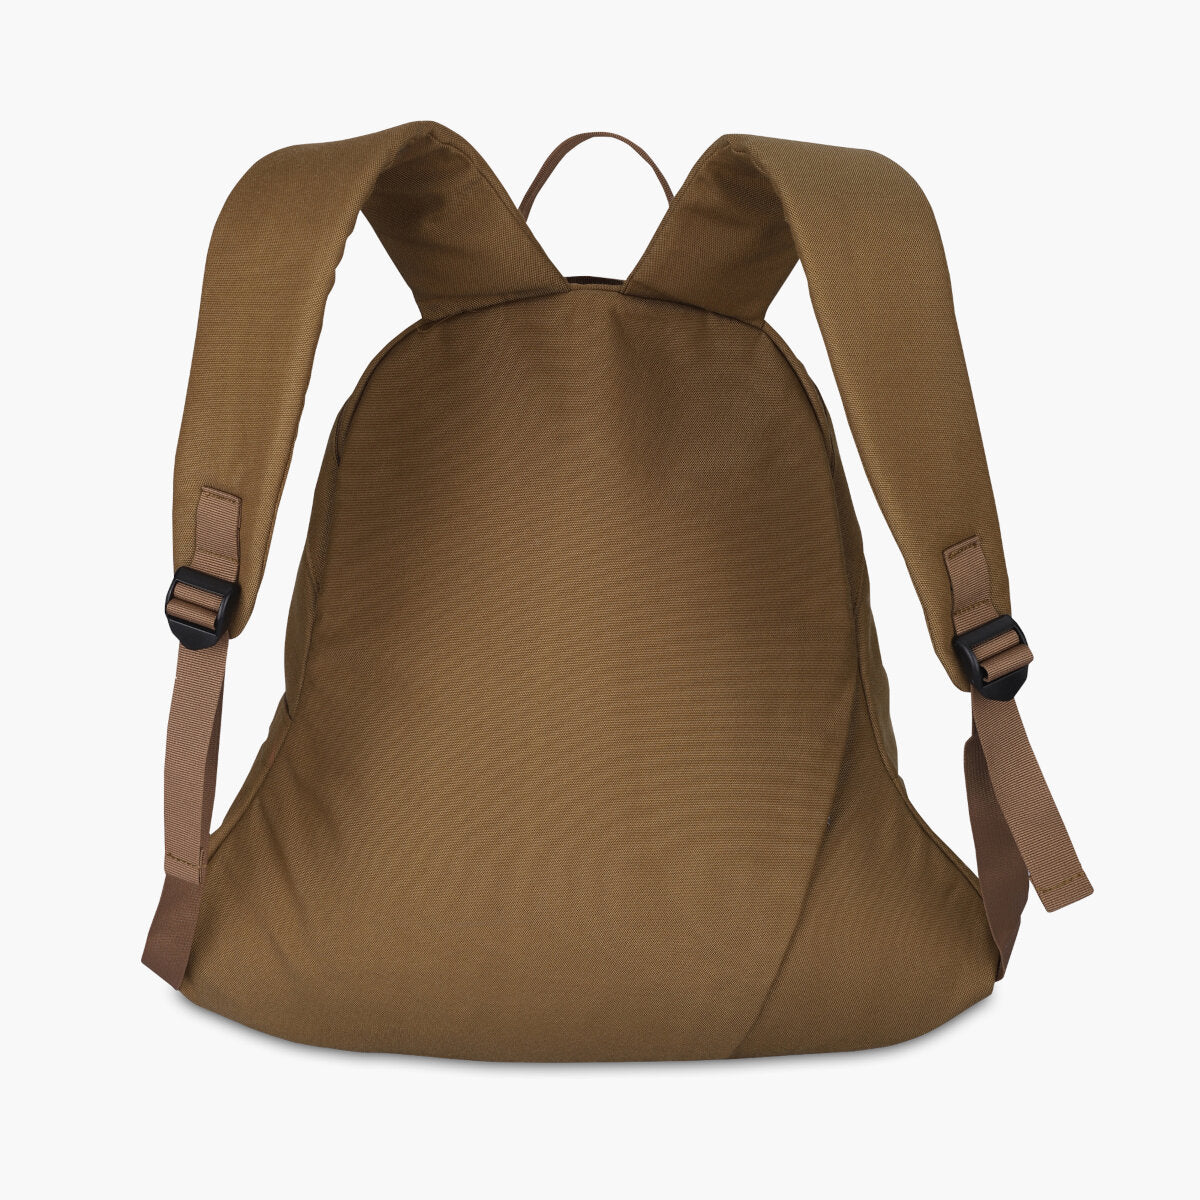 Beige | Protecta Tactical Turn Laptop Backpack - 5